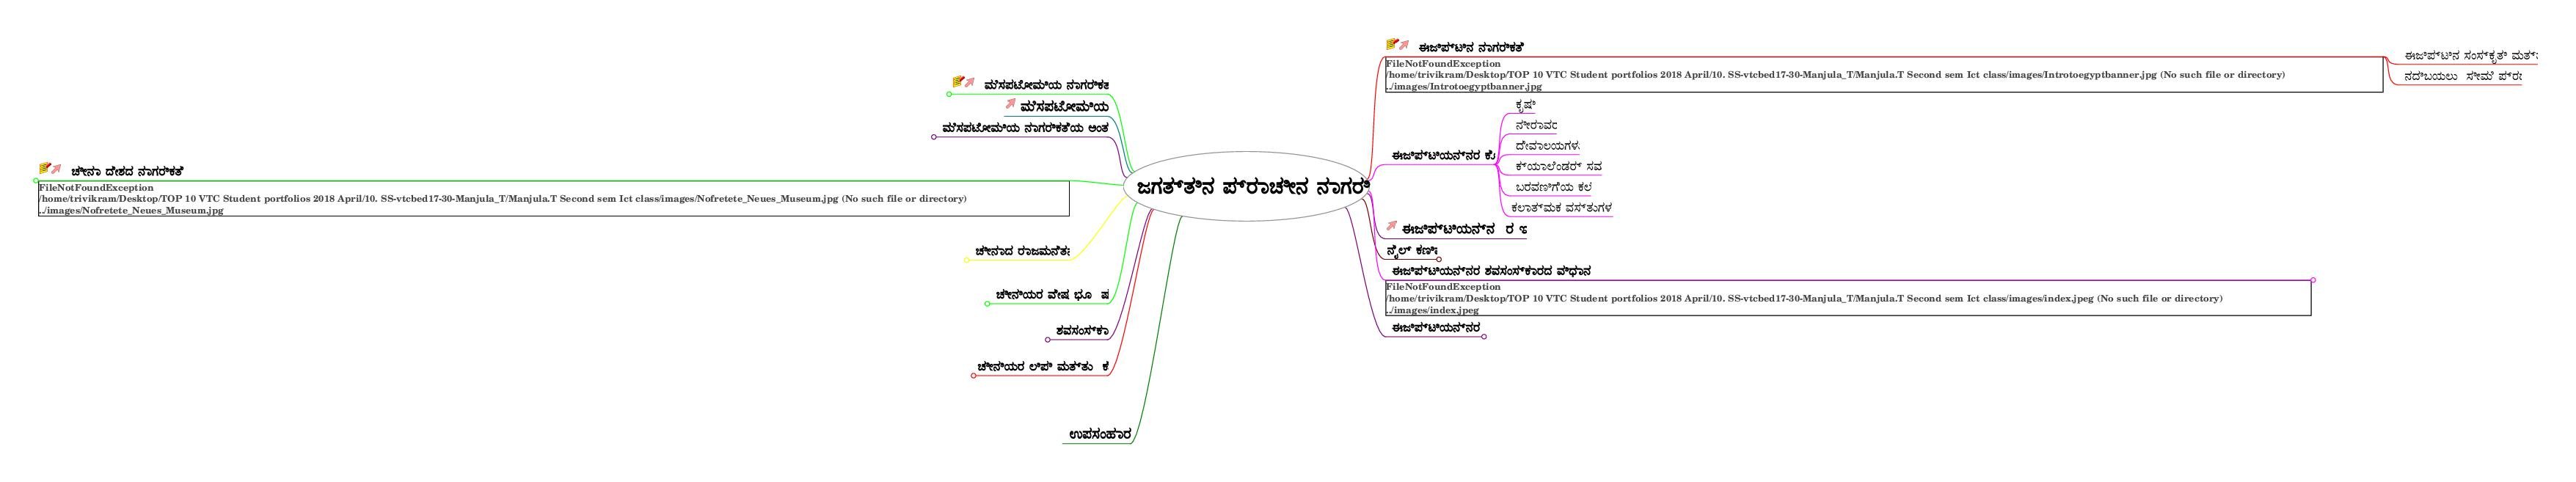 Teaching Material Class 7, Class 8, Class 9, Class 10 History Ancient Civilizations of the World - Mind Map - Page 1